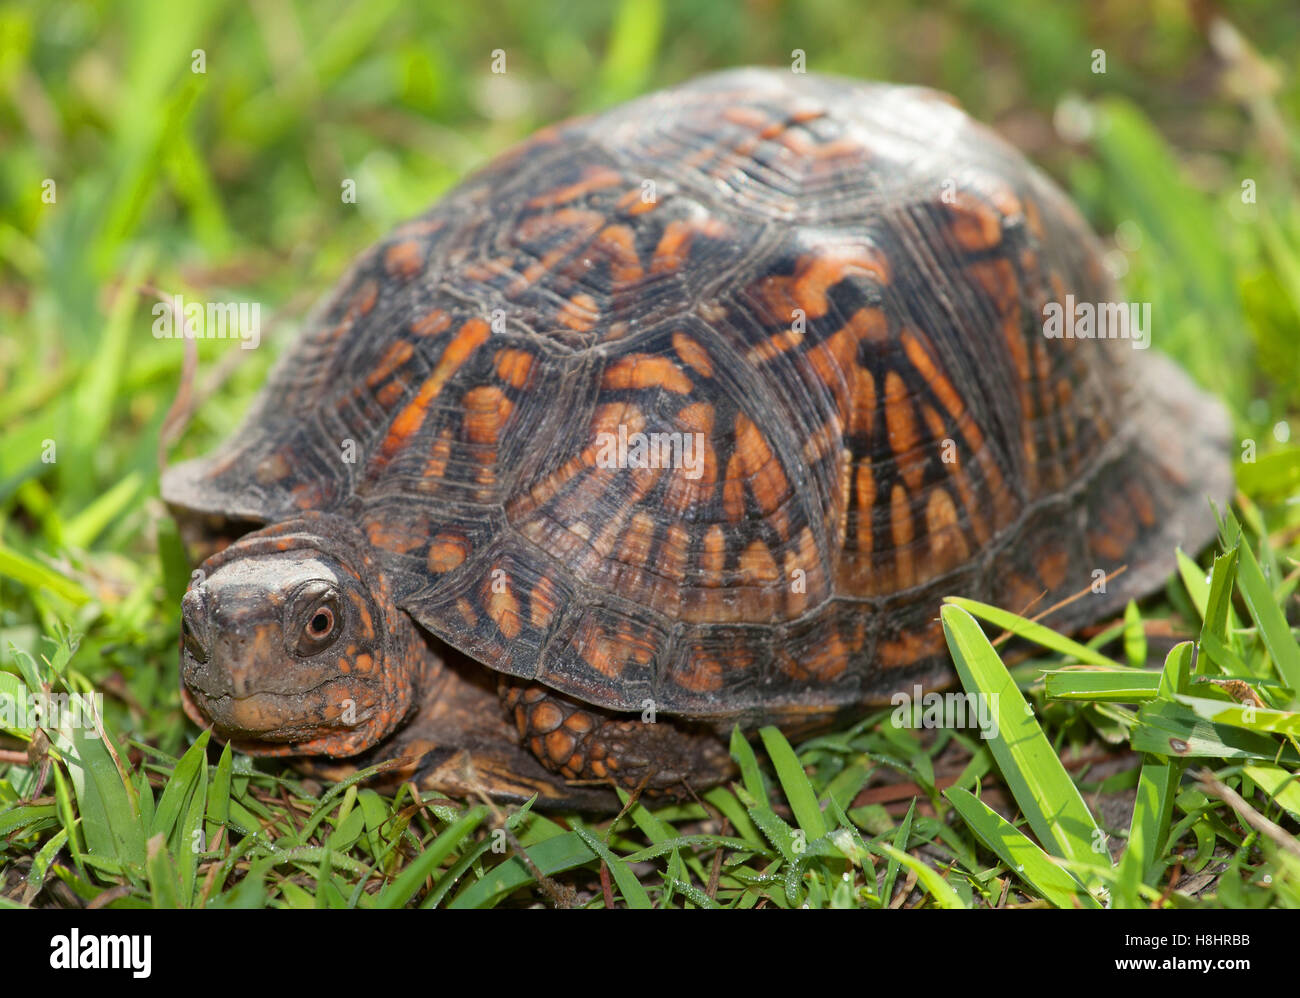 https://c8.alamy.com/comp/H8HRBB/turtle-that-is-about-to-pull-its-head-back-into-its-shell-H8HRBB.jpg